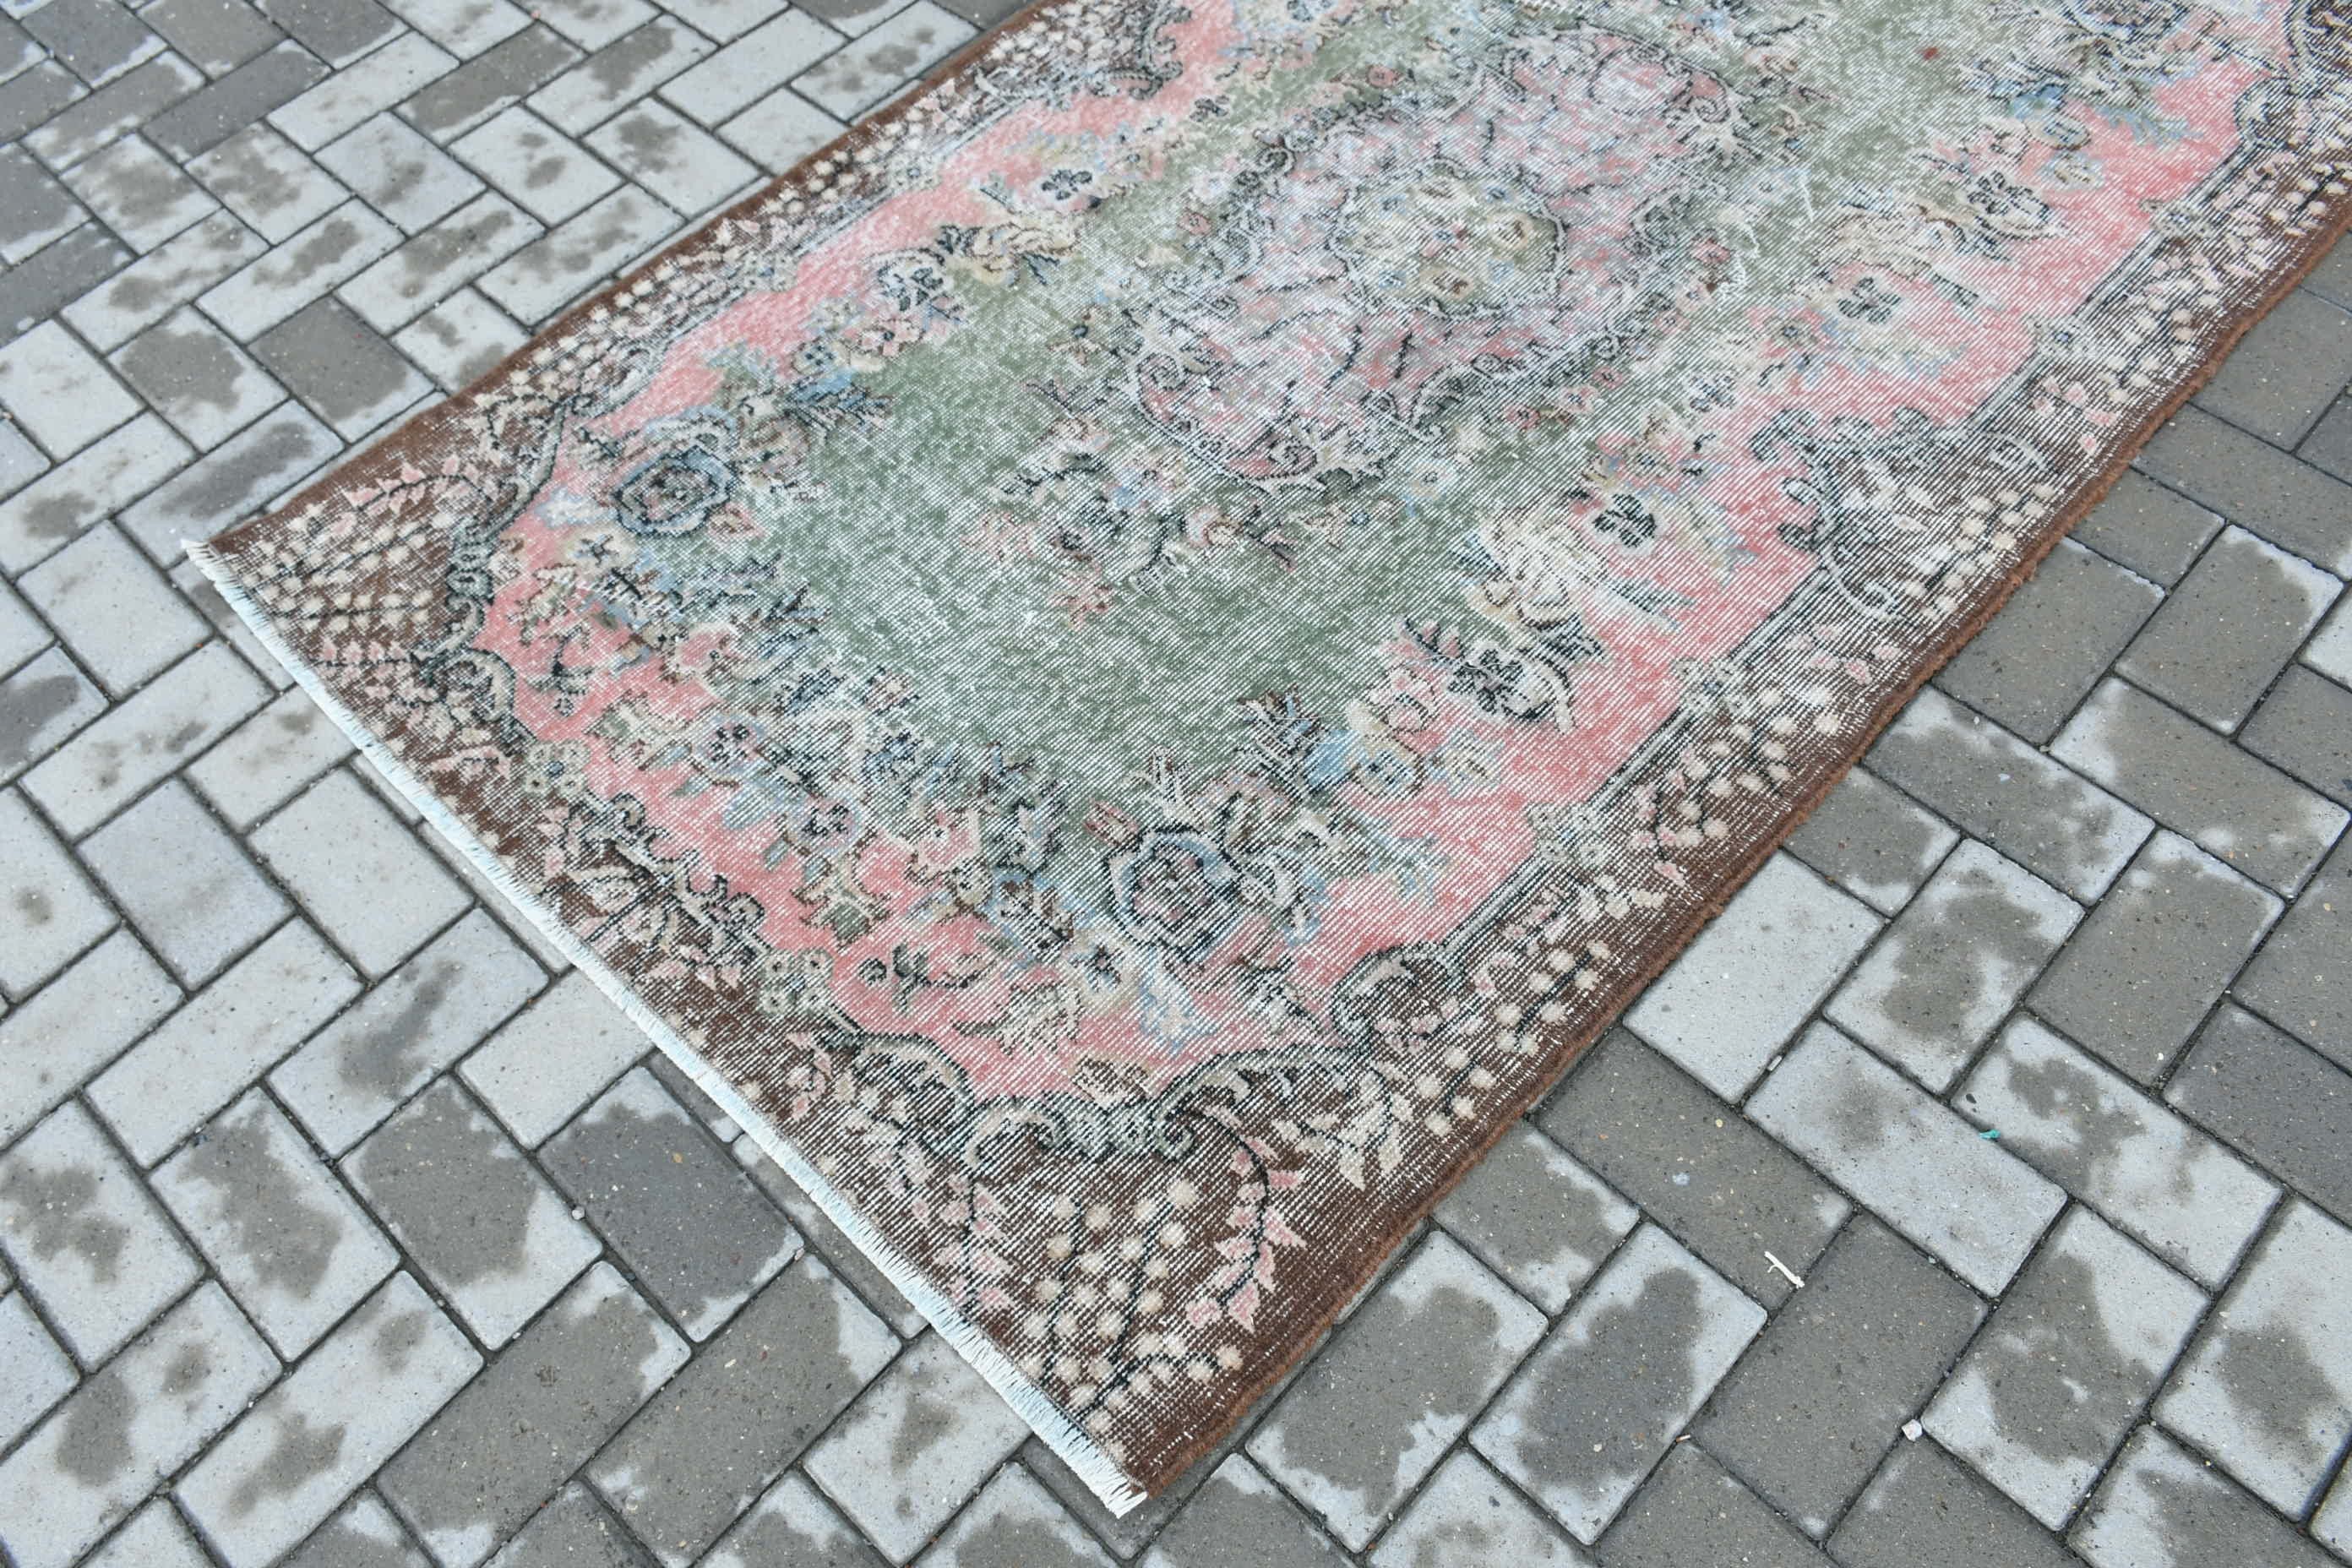 Vintage Rugs, 3.9x6.9 ft Area Rugs, Rugs for Area, Pink Wool Rugs, Kitchen Rug, Turkish Rugs, Bedroom Rugs, Antique Rugs